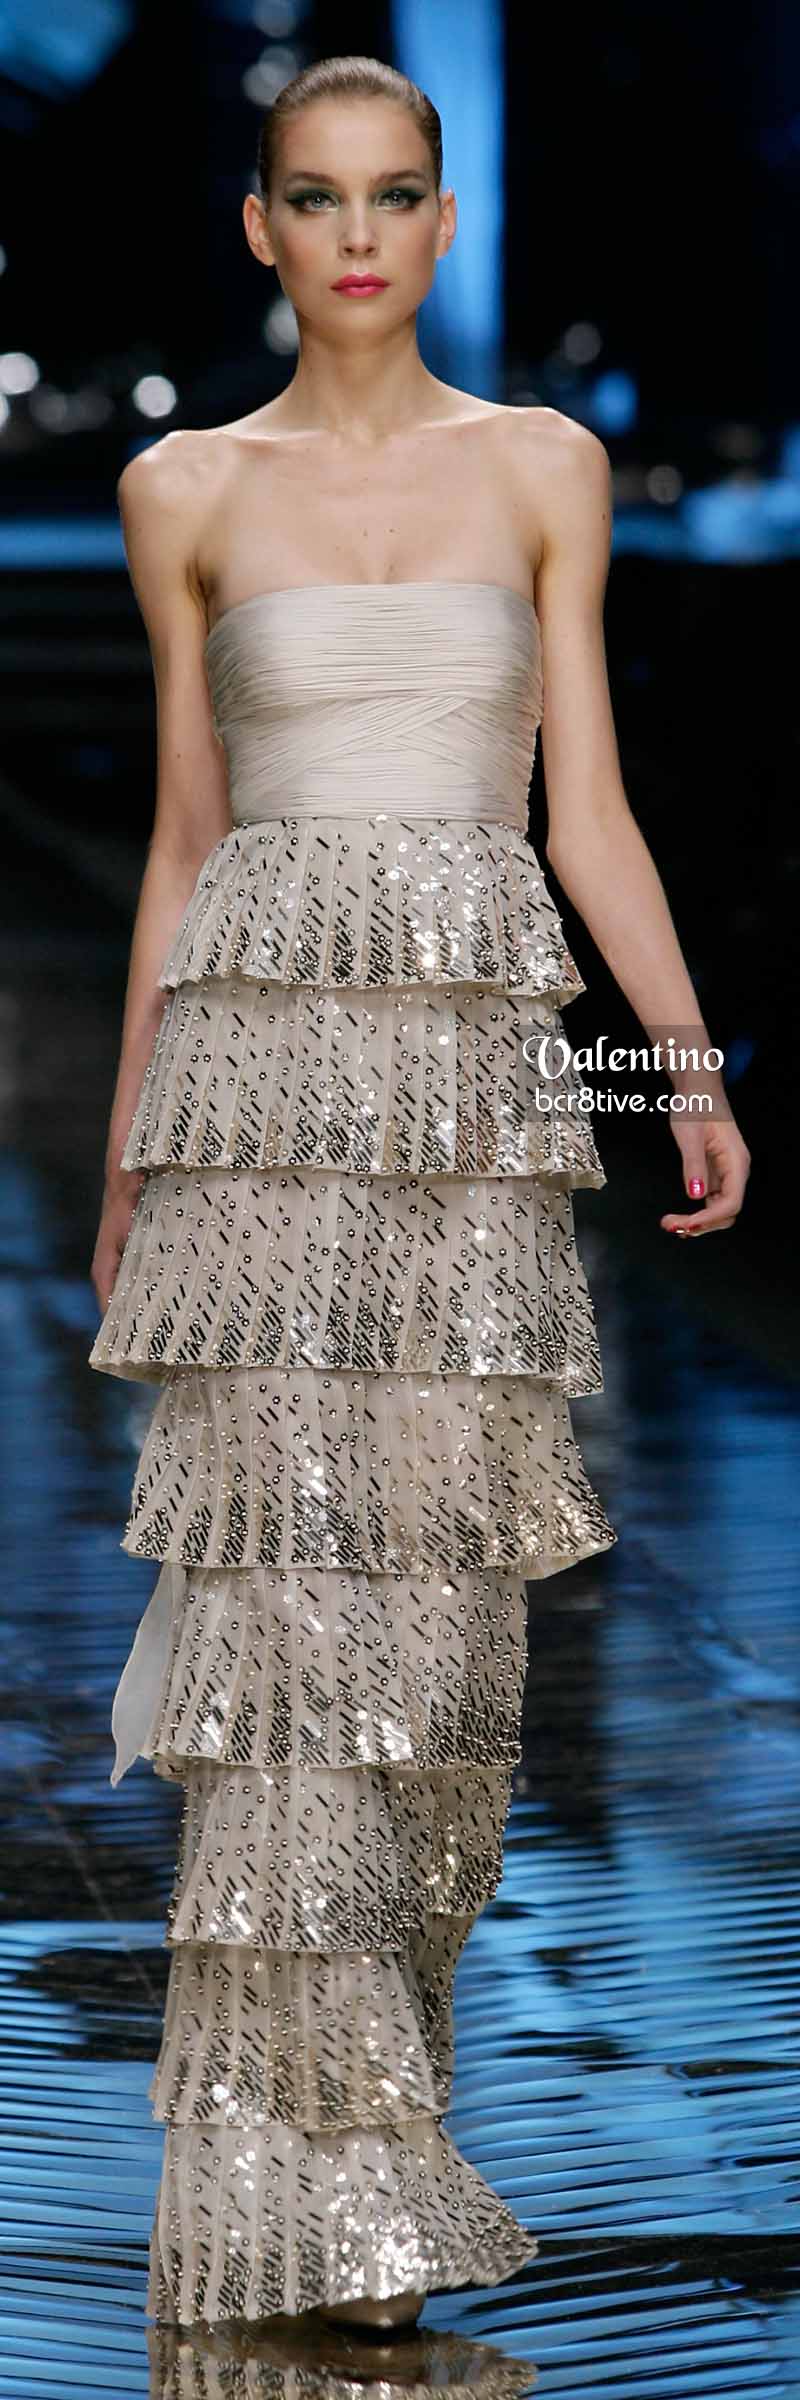 Valentino Neutral Strapless and Beaded Multi-Tiered Gown